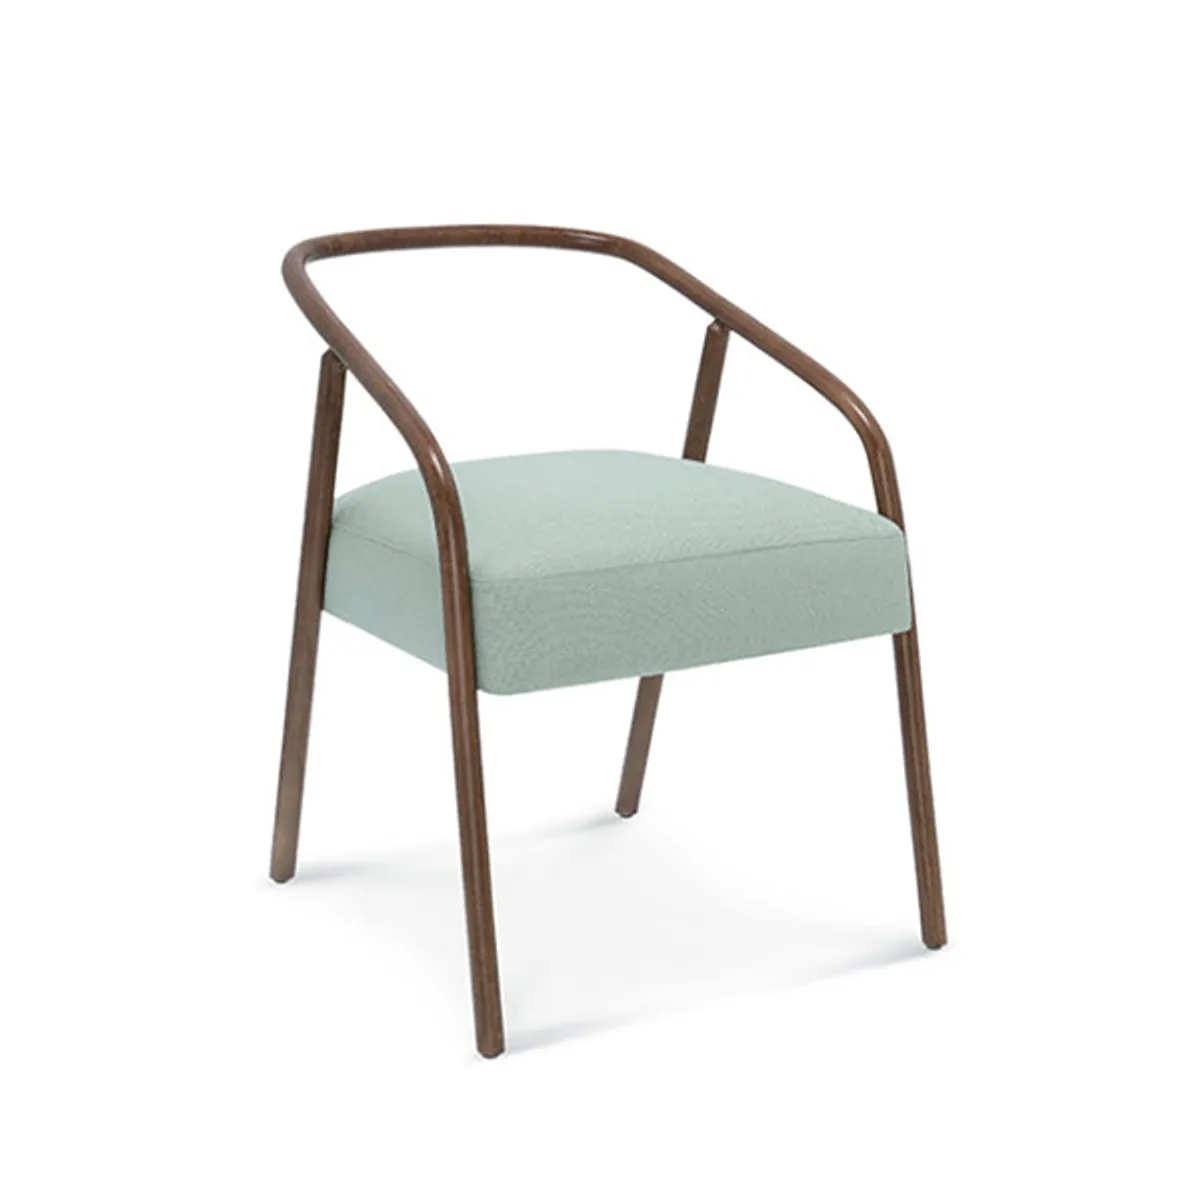 Nectar Armchair 2 Contemporary Bentwood Furniture Insideoutcontracts 024